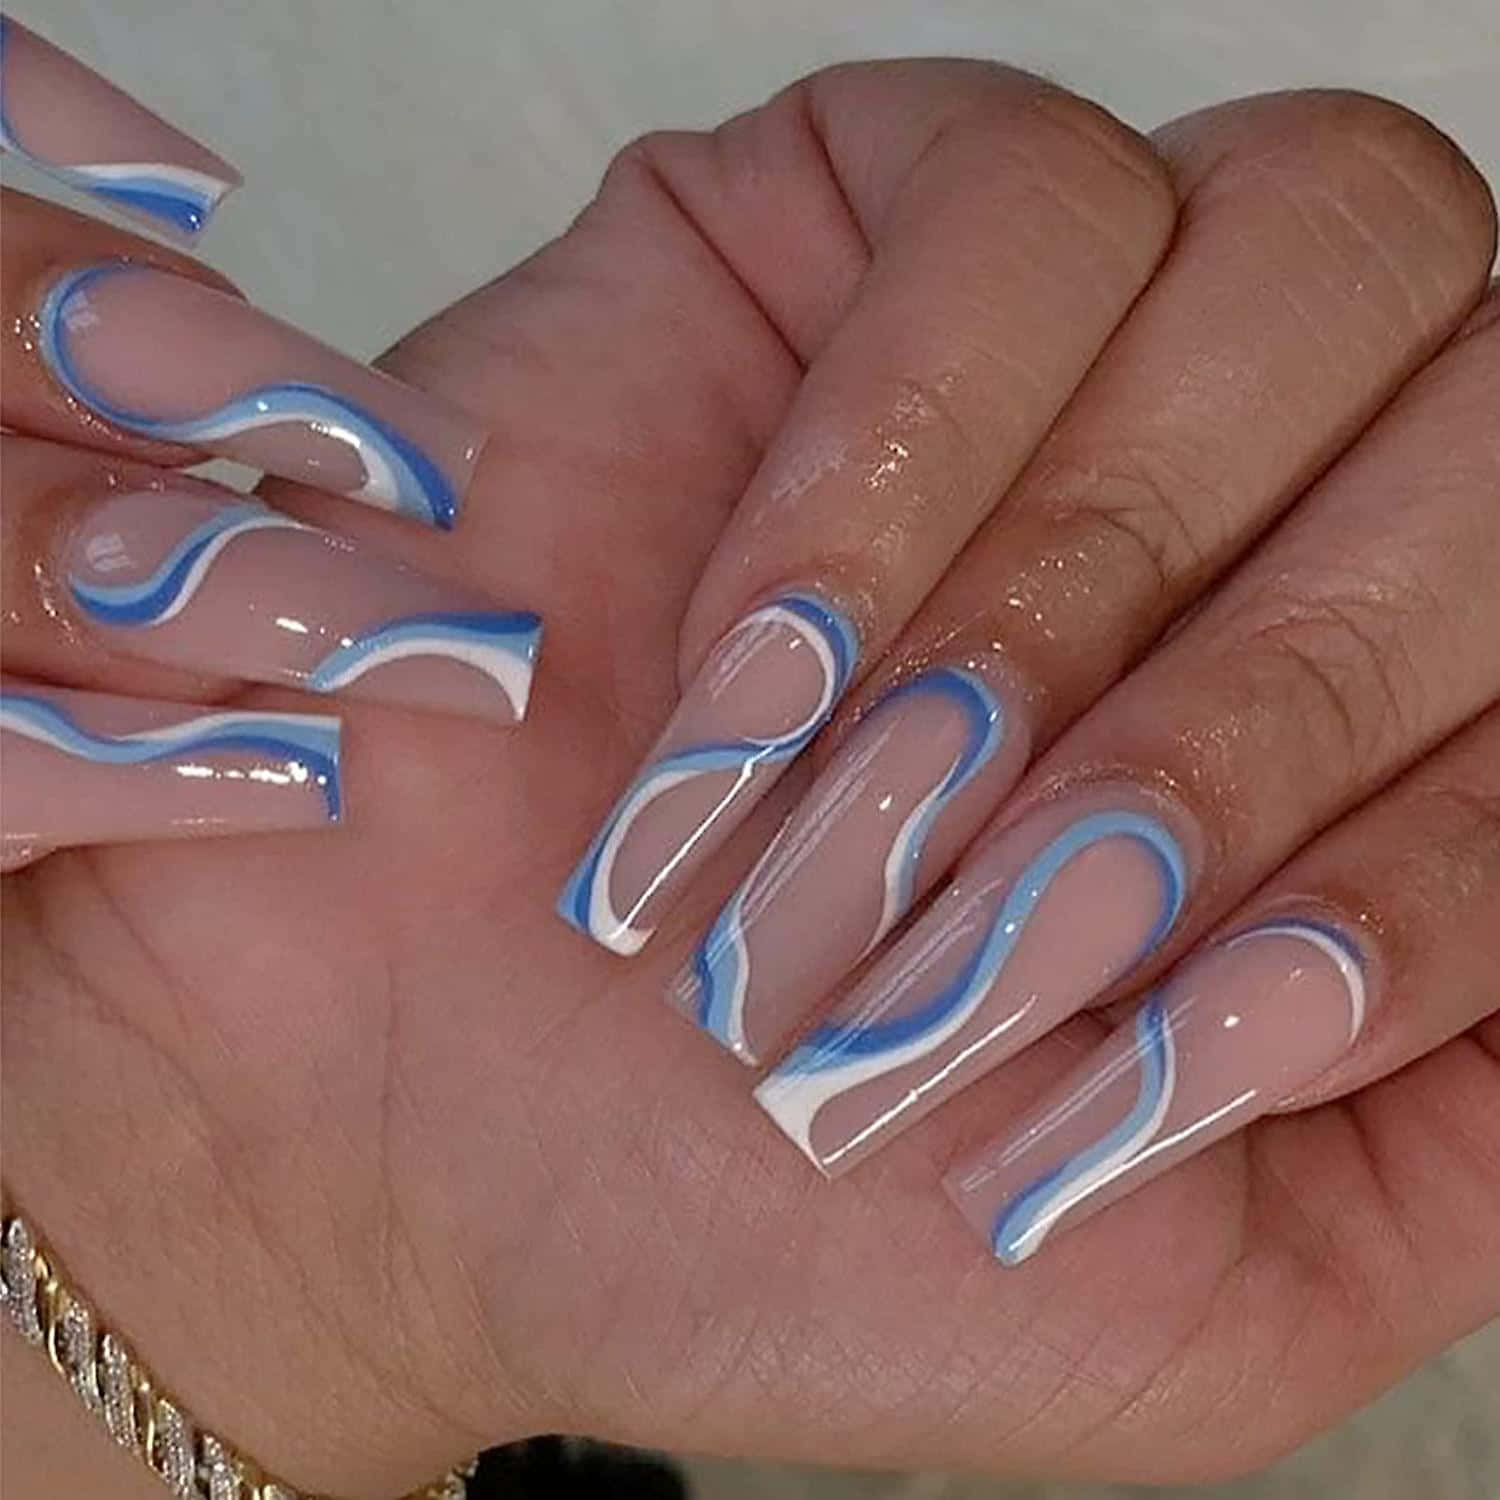 Get stylish with these fake nails!